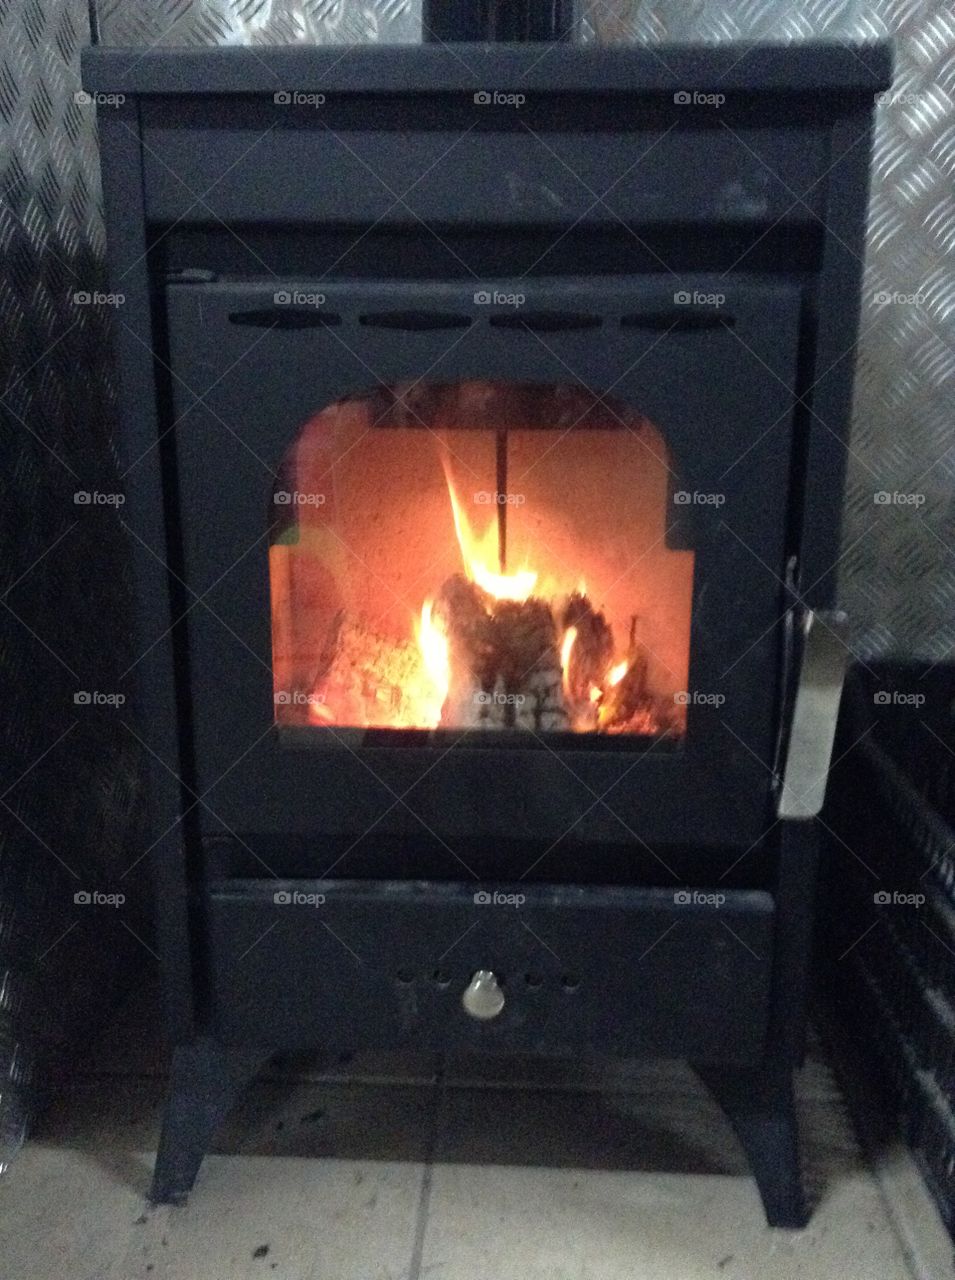 Wood stove with fire burning.